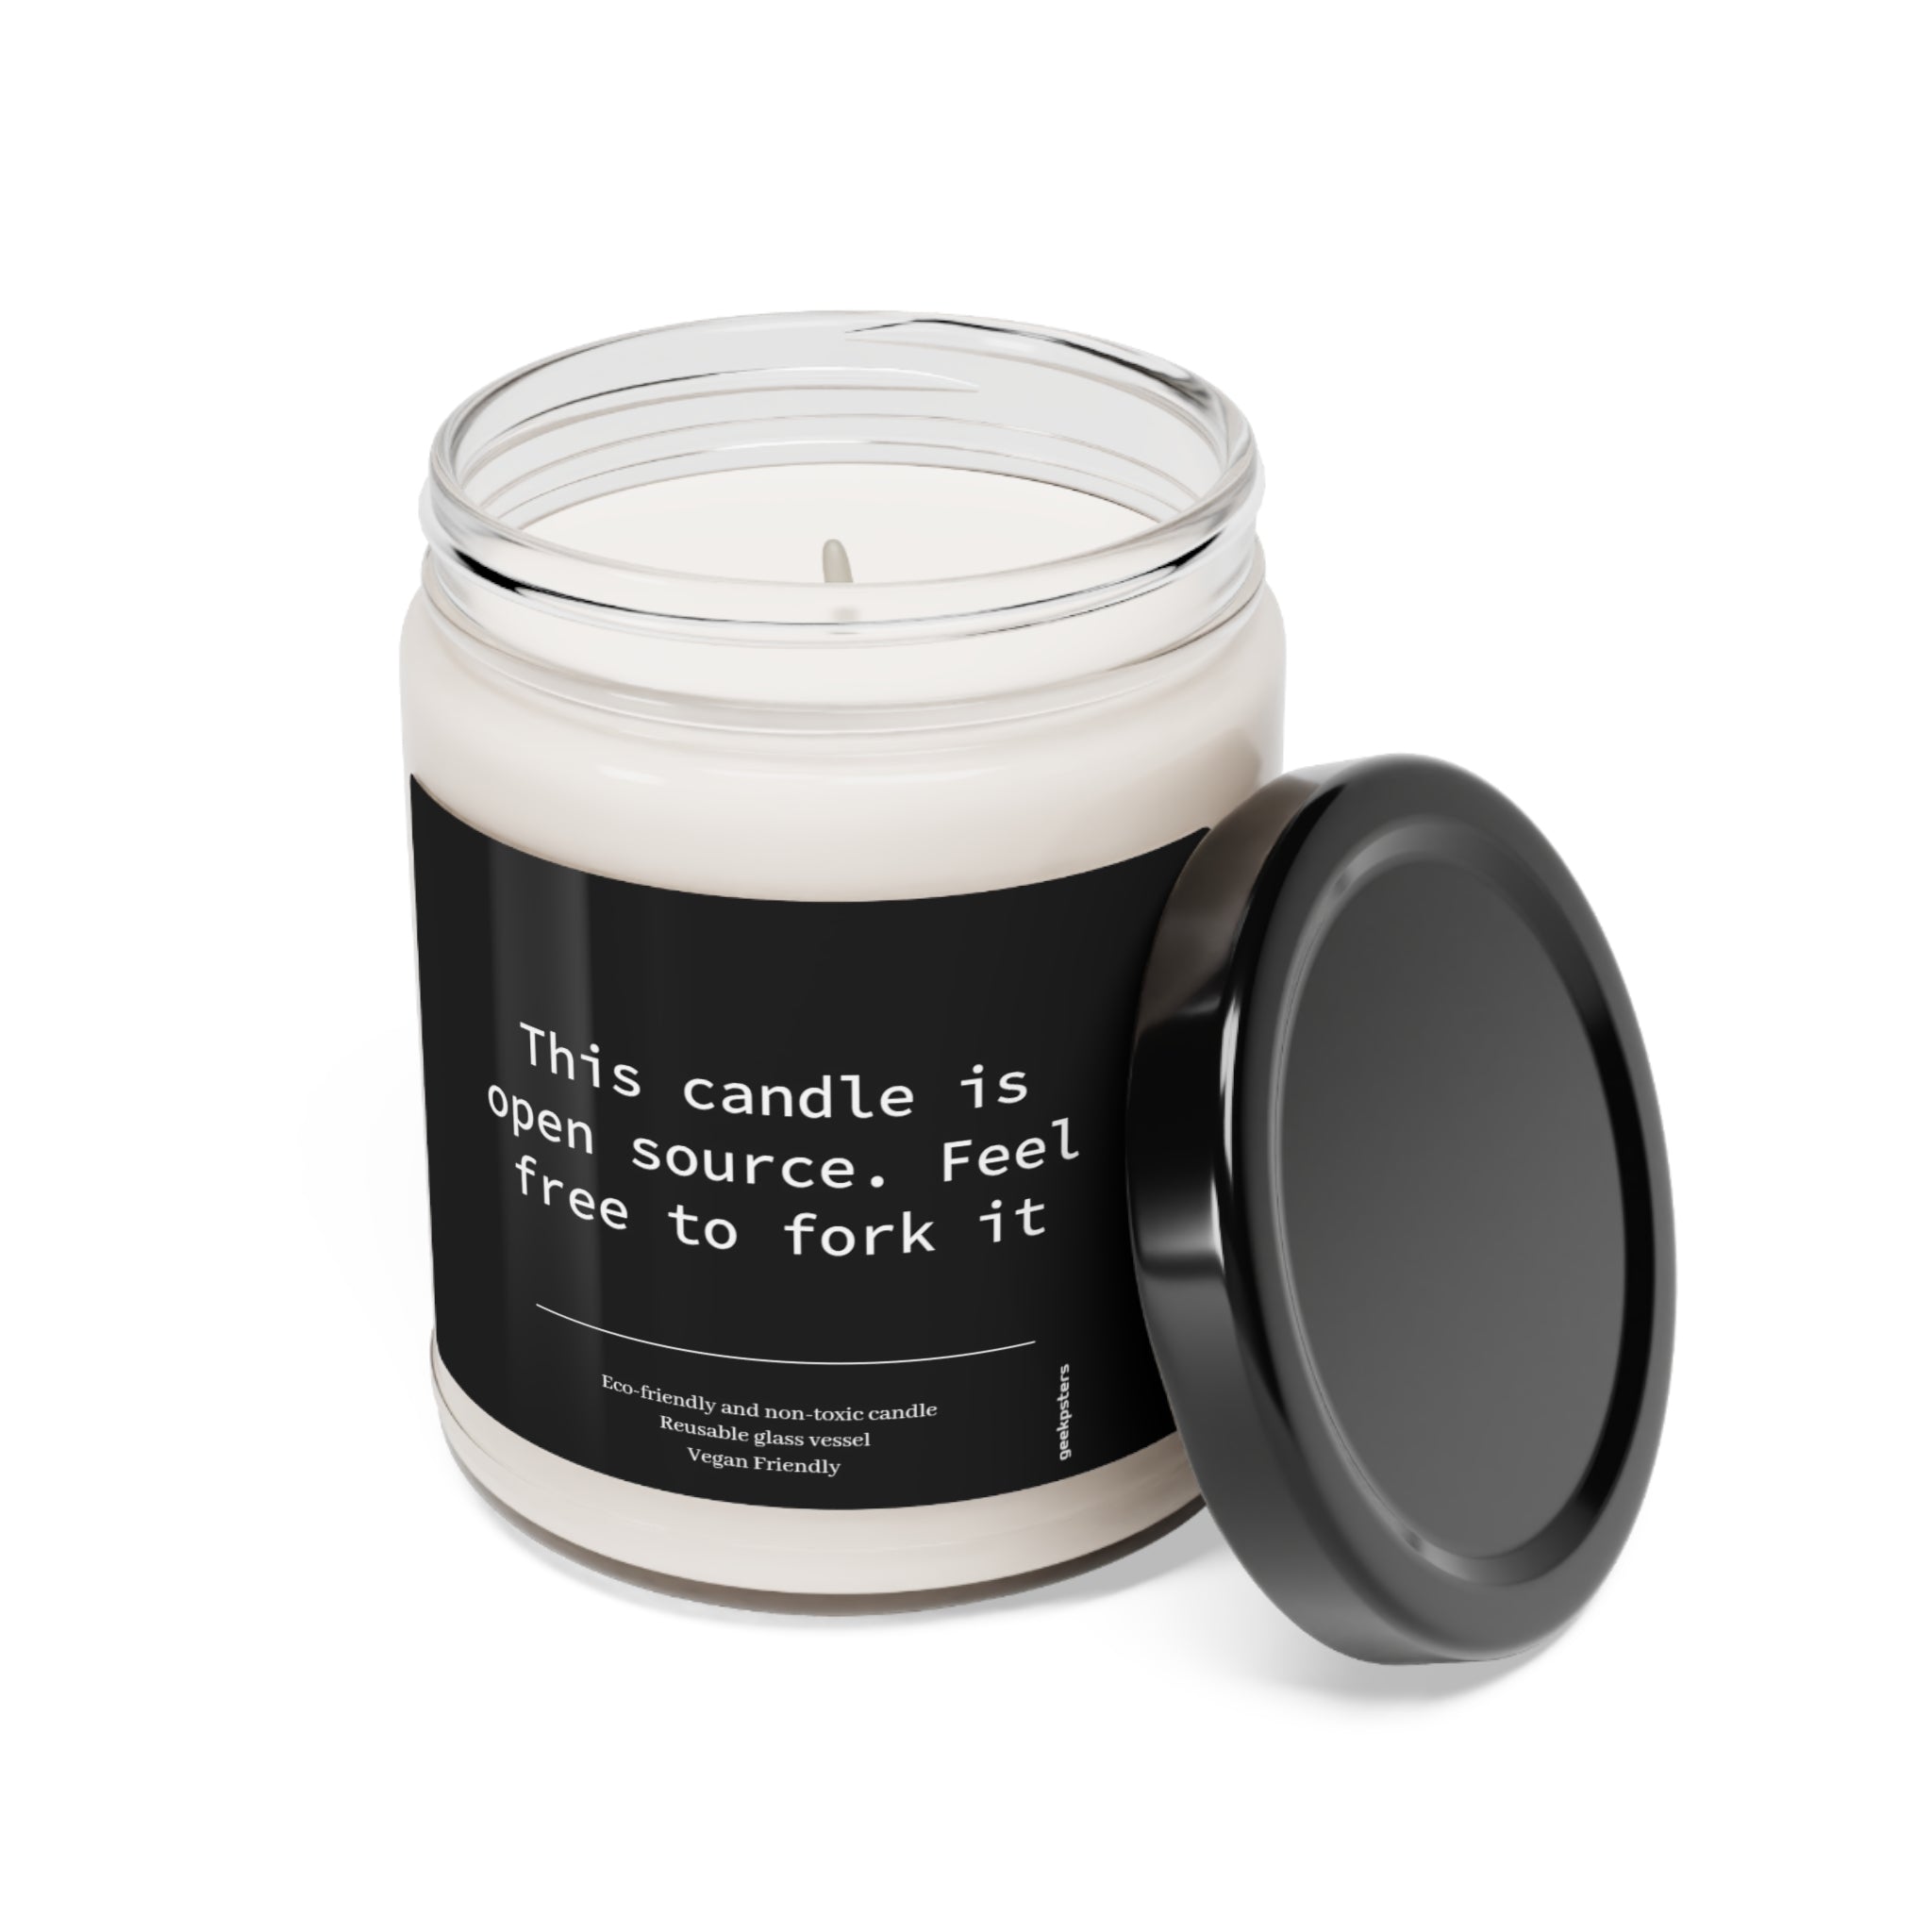 This Candle is Open Source - Feel Free to Fork It - Scented Soy Candle, 9oz with a humorous label that reads "this candle is open source. feel free to fork it," featuring a cotton wick, presented next to its detached black lid on a white background